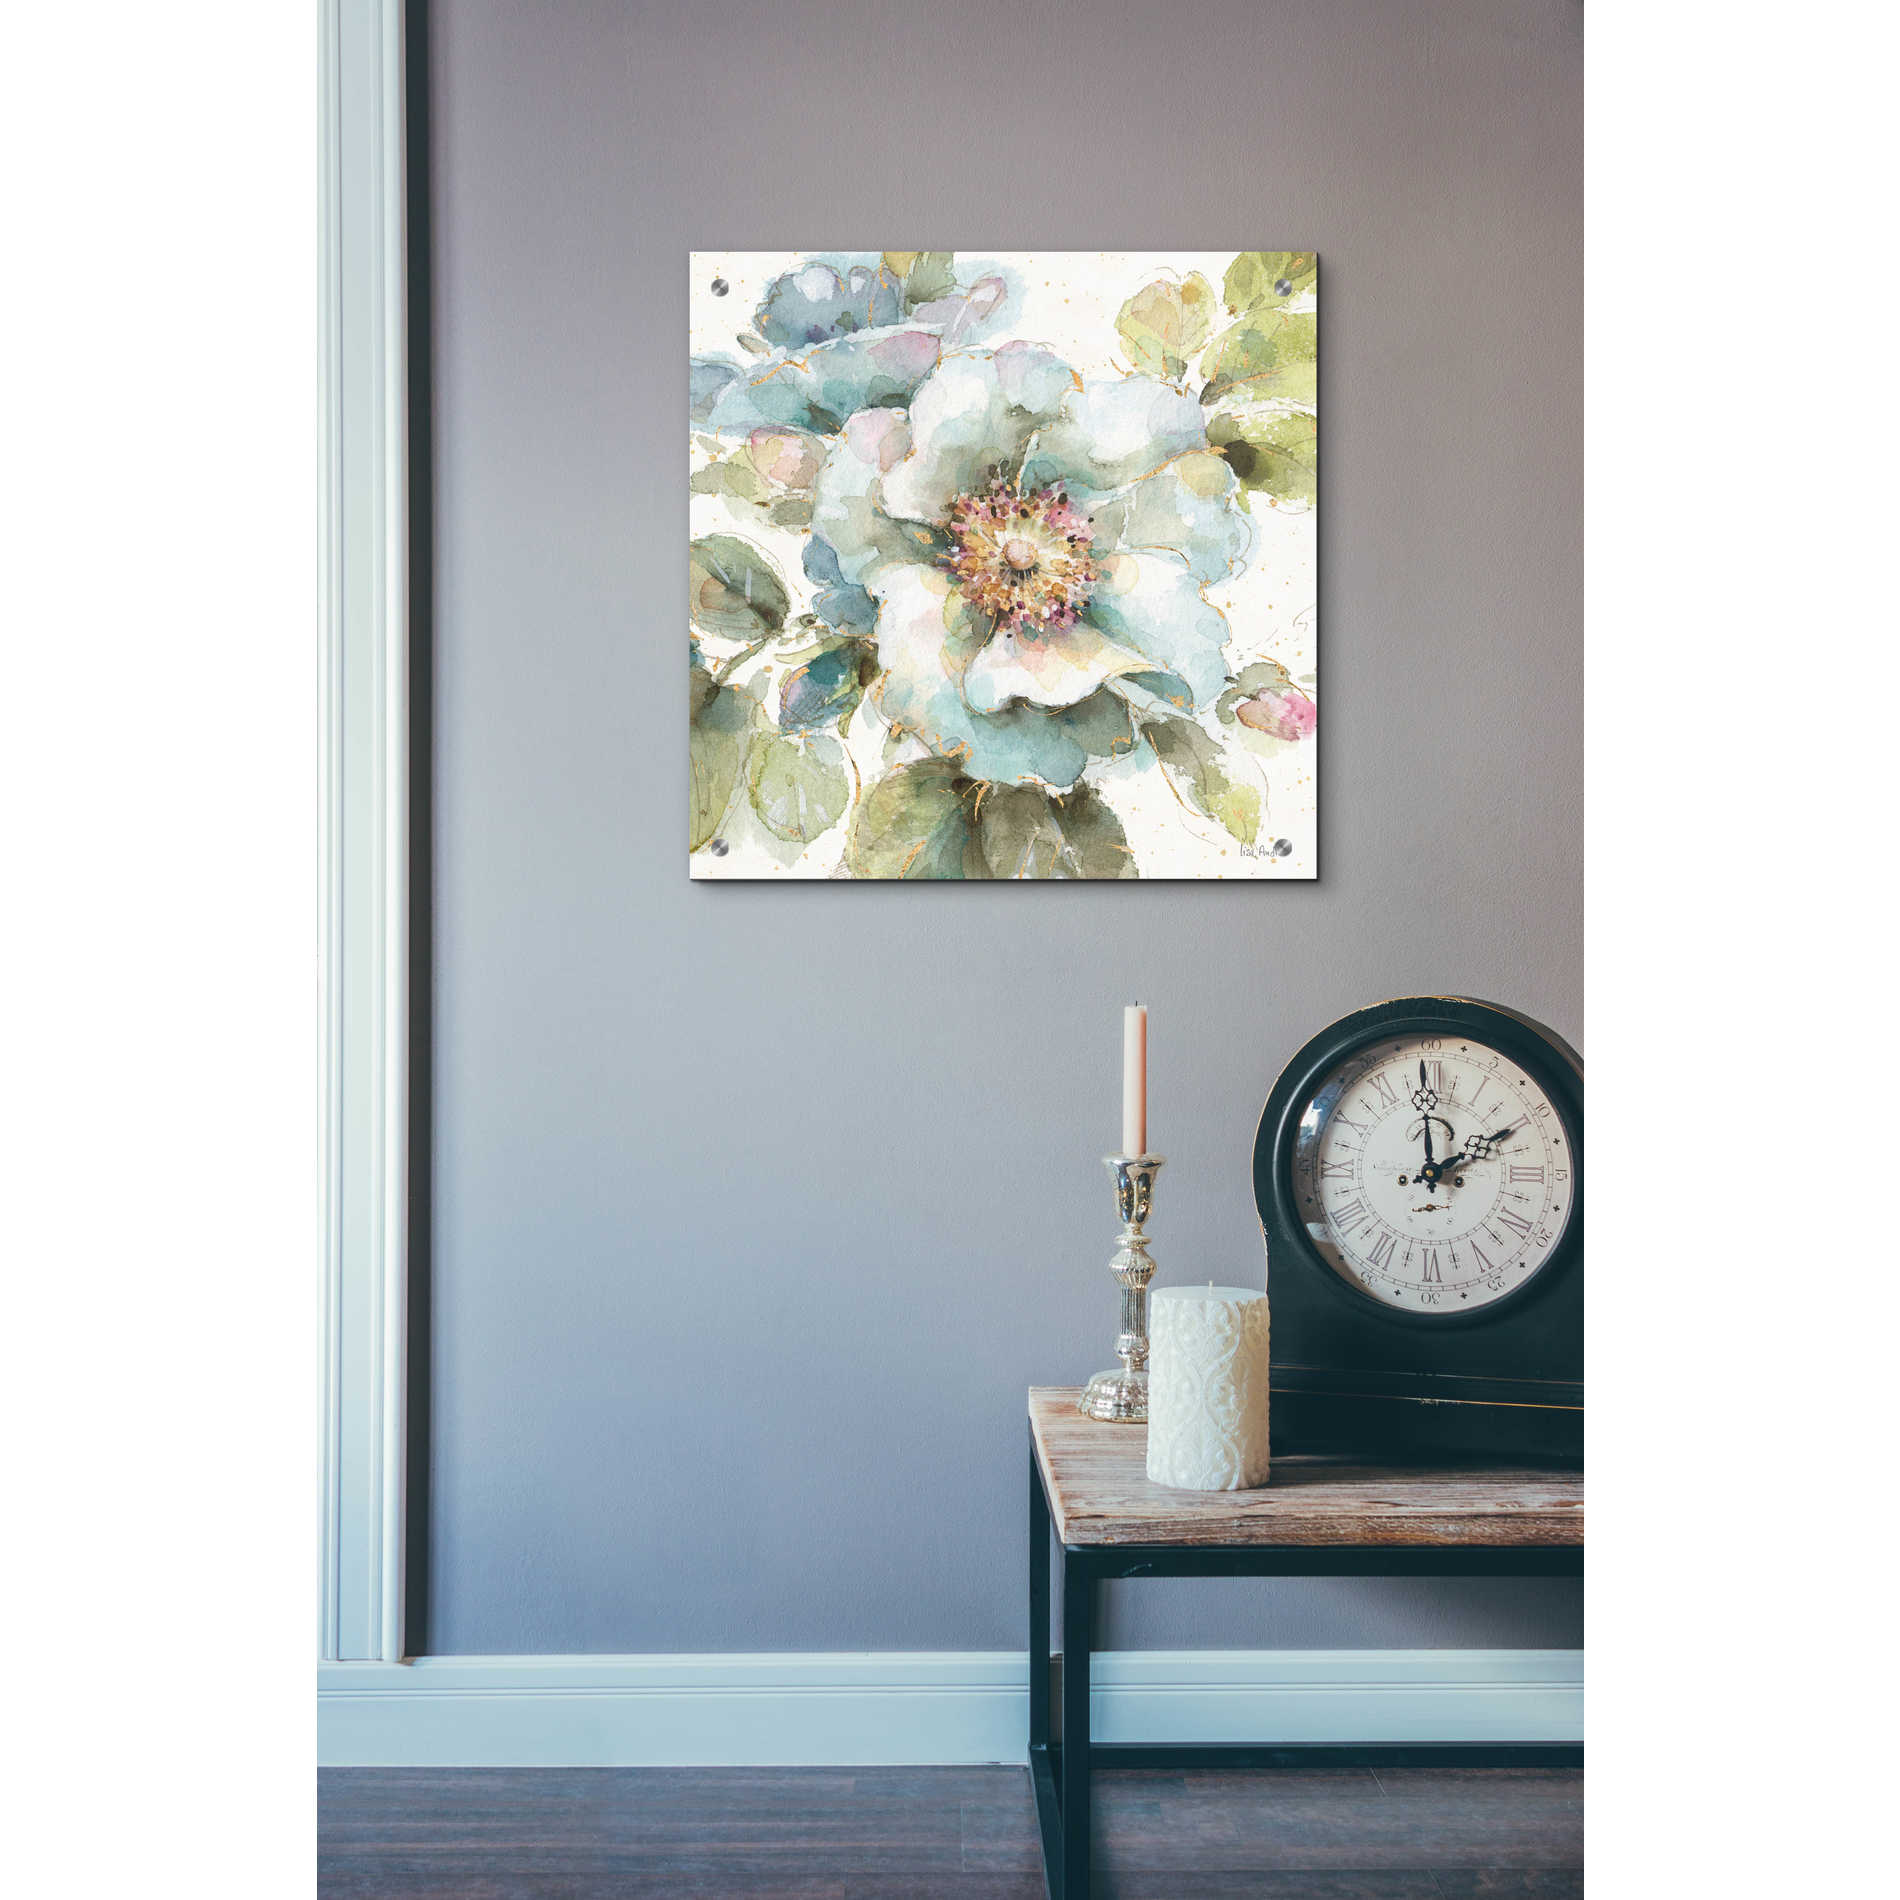 Epic Art 'Country Bloom VII' by Lisa Audit, Acrylic Glass Wall Art,24x24